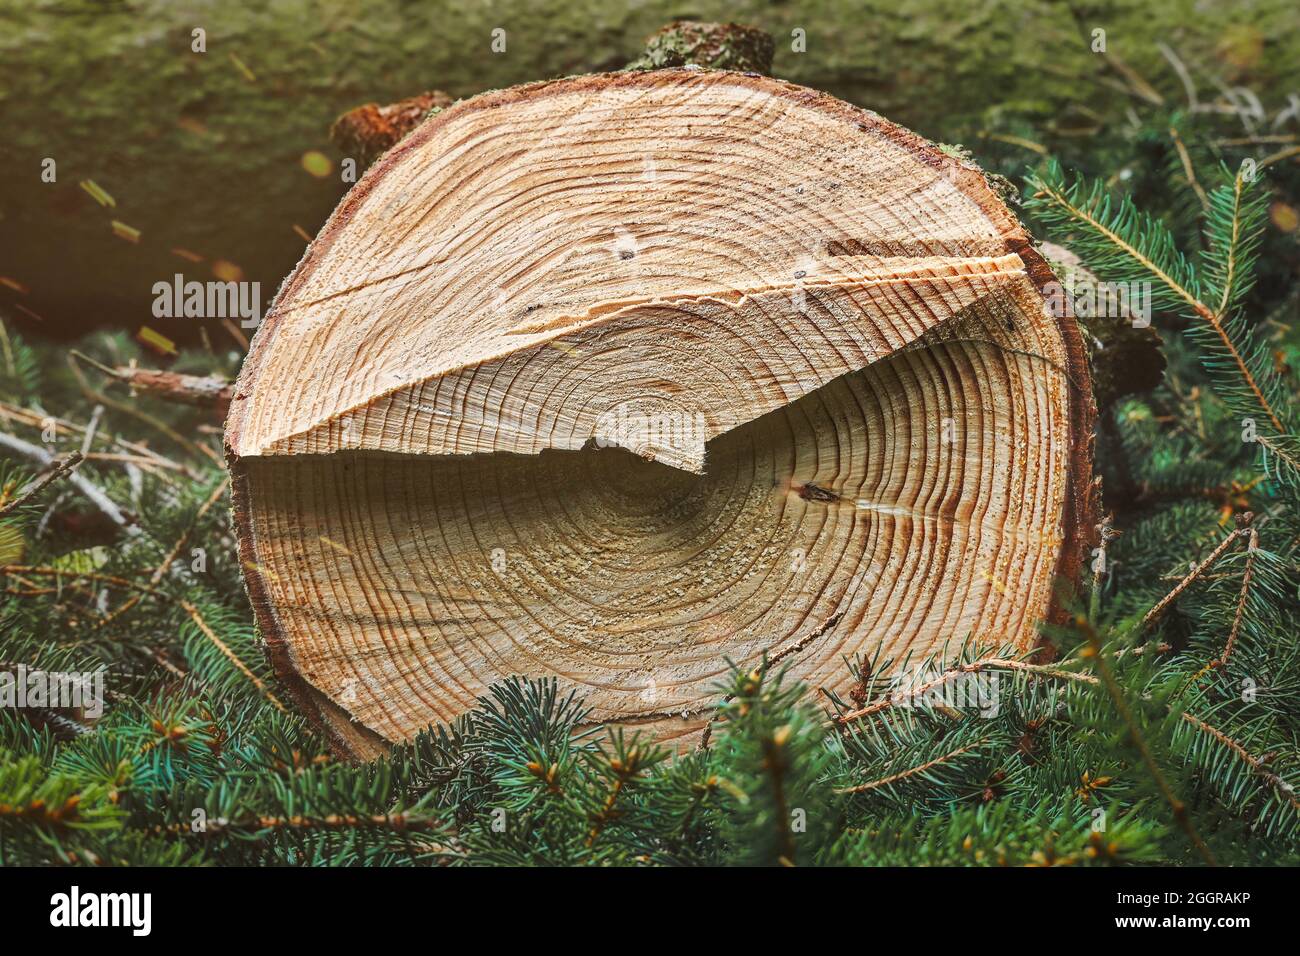 Cut tree trunk. Felled spruce tree, cross section showing annual rings. Logging, forest work, silviculture. Stock Photo